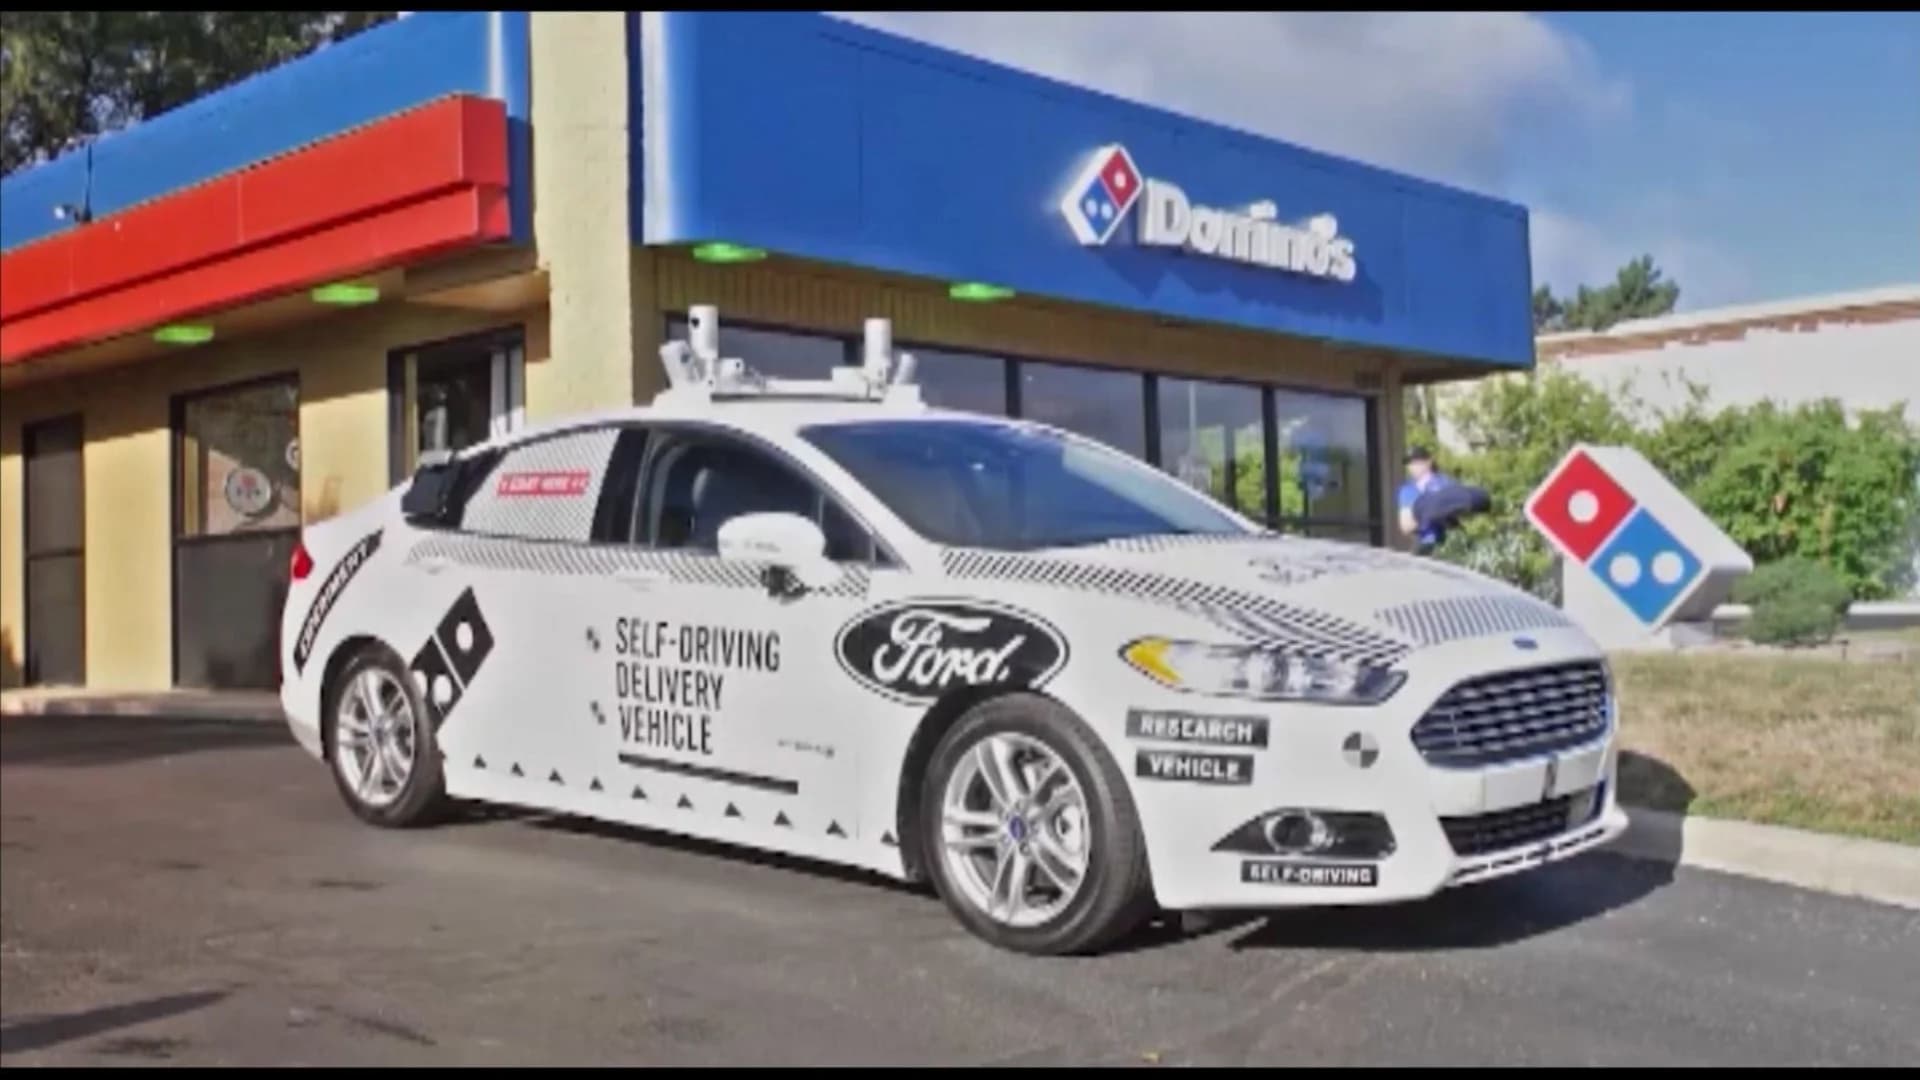 Ford, Domino's team up to test driverless pizza delivery